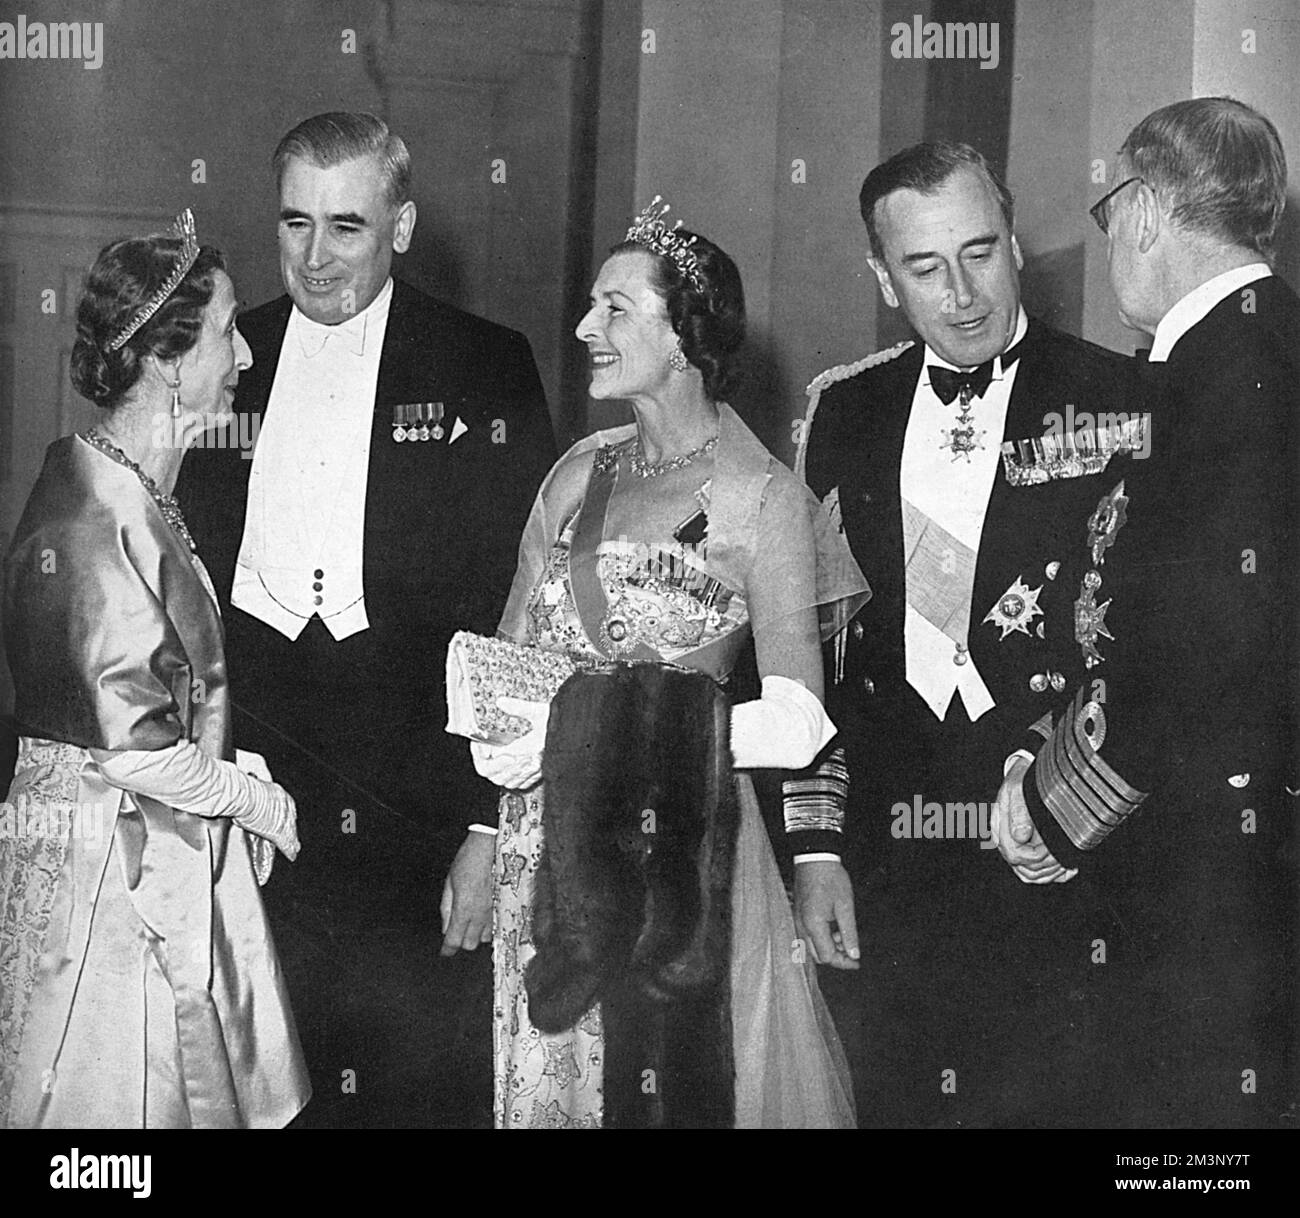 King Gustav VI of Sweden (1882 - 1973), pictured far right of the picture with his second wife, formerly Princess Louise of Battenberg, Lady Louise Mountbatten, being entertained by the Admiralty at a banquet at Greenwich at the Royal Naval College.  They are with Earl and Countess Mountbatten (the Earl was Queen Louise's brother) and the Rt. Hon. J. P. L. Thomas, First Lord of the Admiralty.       Date: 1955 Stock Photo